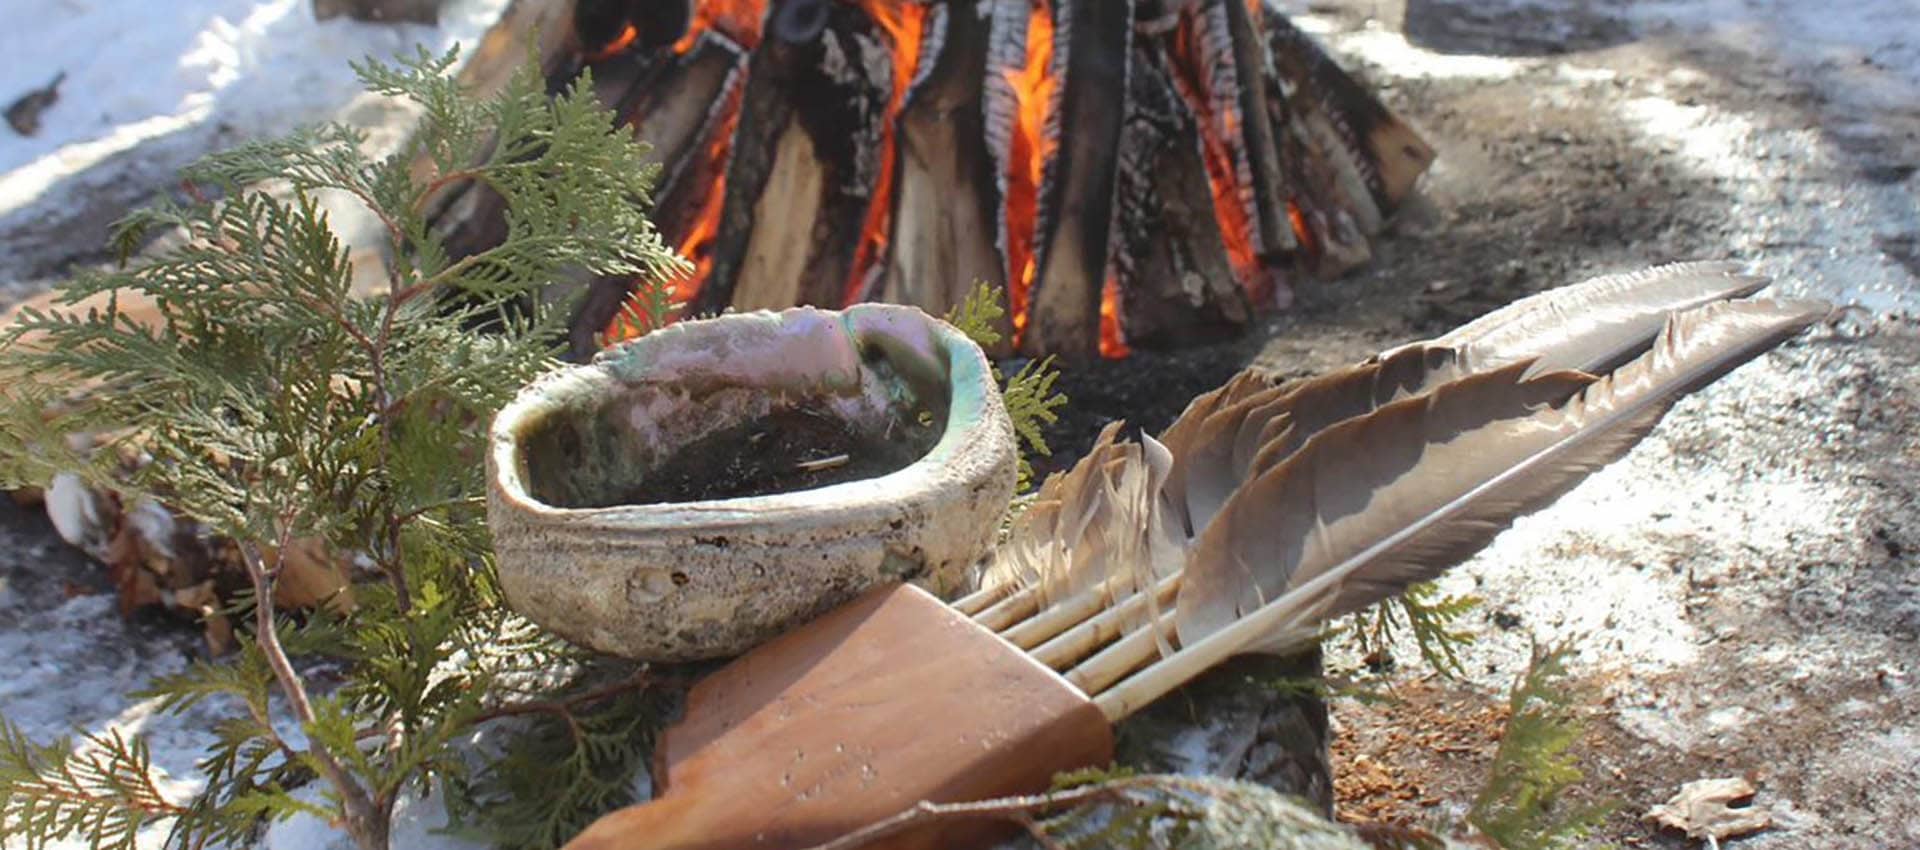 Cedar branches, abalone smudge bowl and feather fan sitting in front of a fire